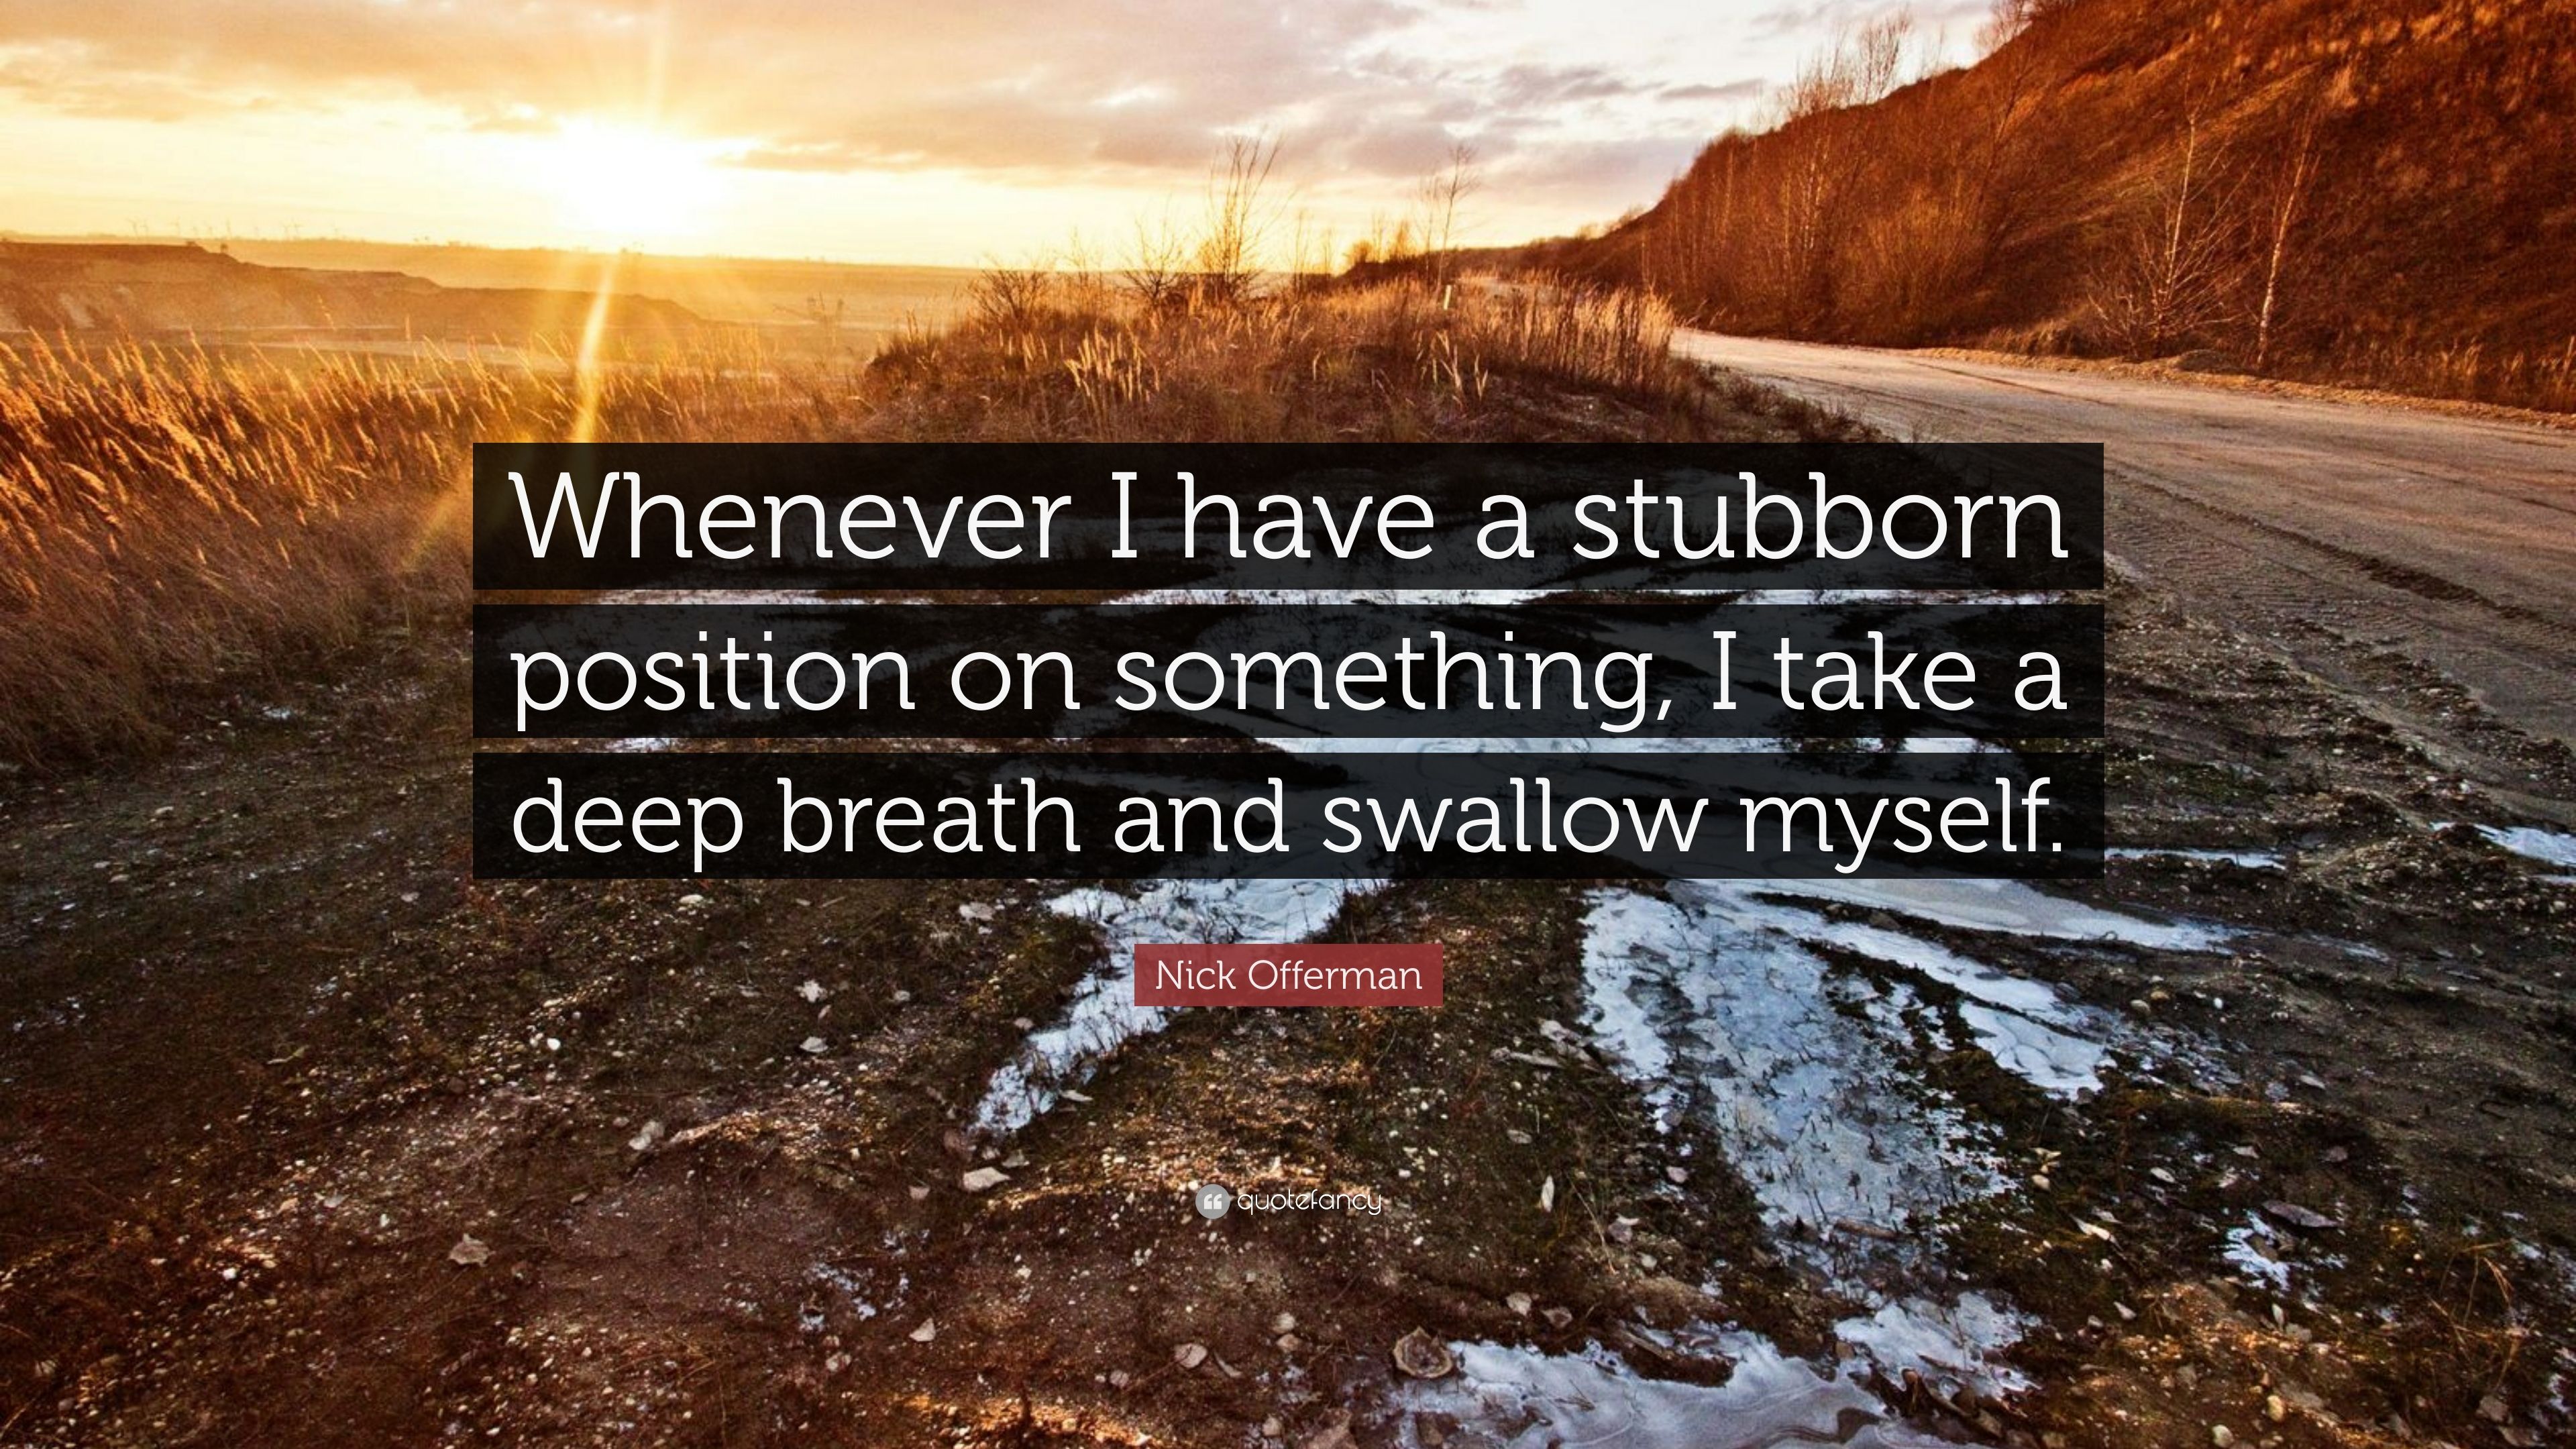 Nick Offerman Quote: “Whenever I have a stubborn position